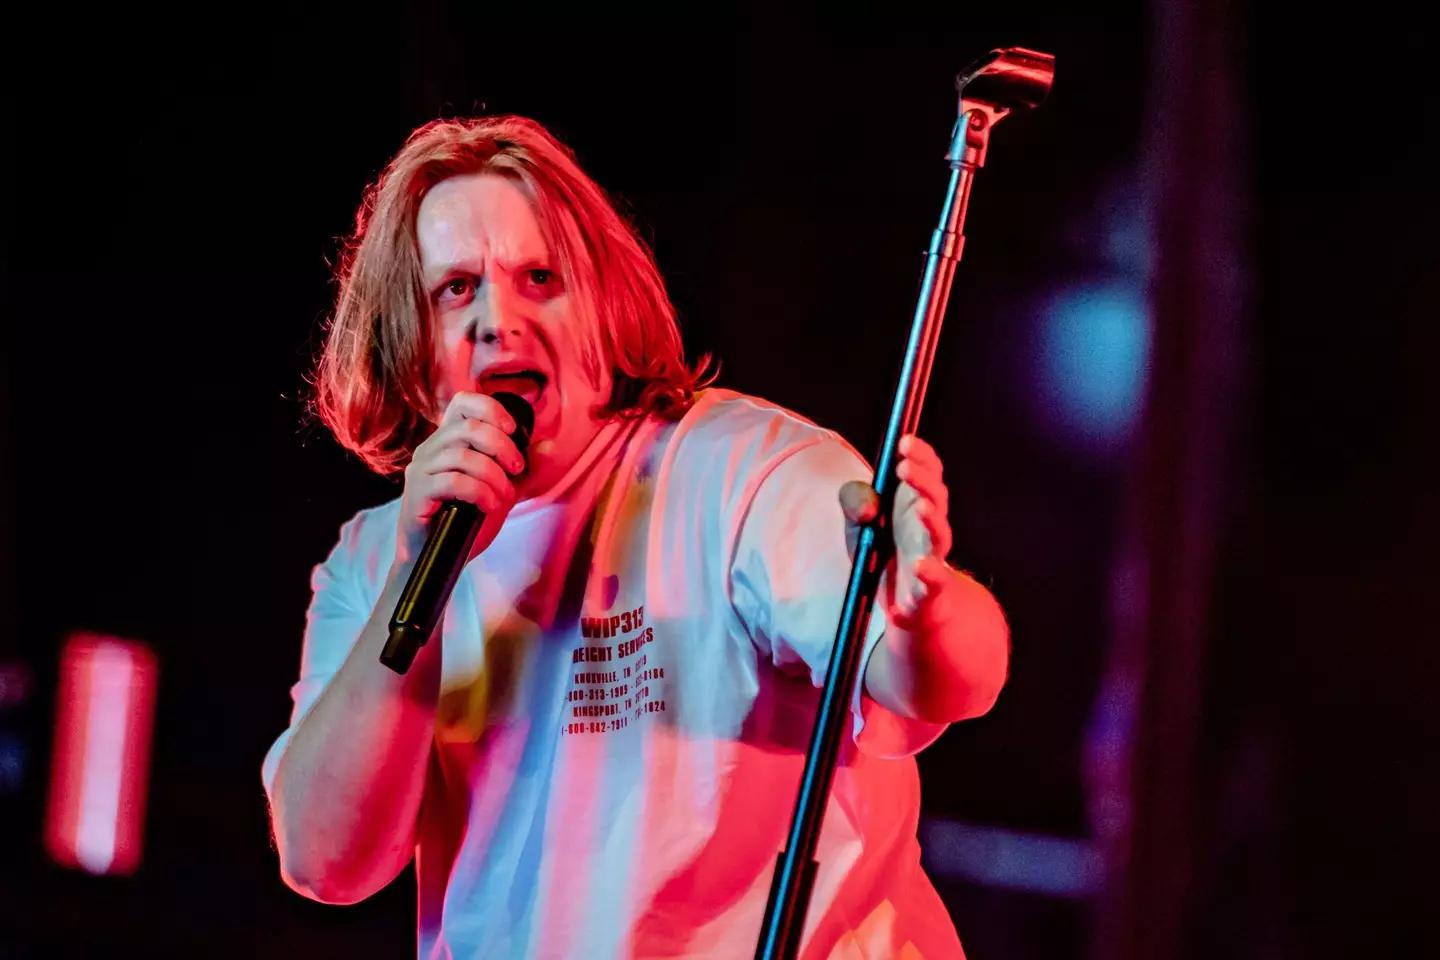 Lewis Capaldi said he ‘freaked out’ after taking medically prescribed cannabis oil.